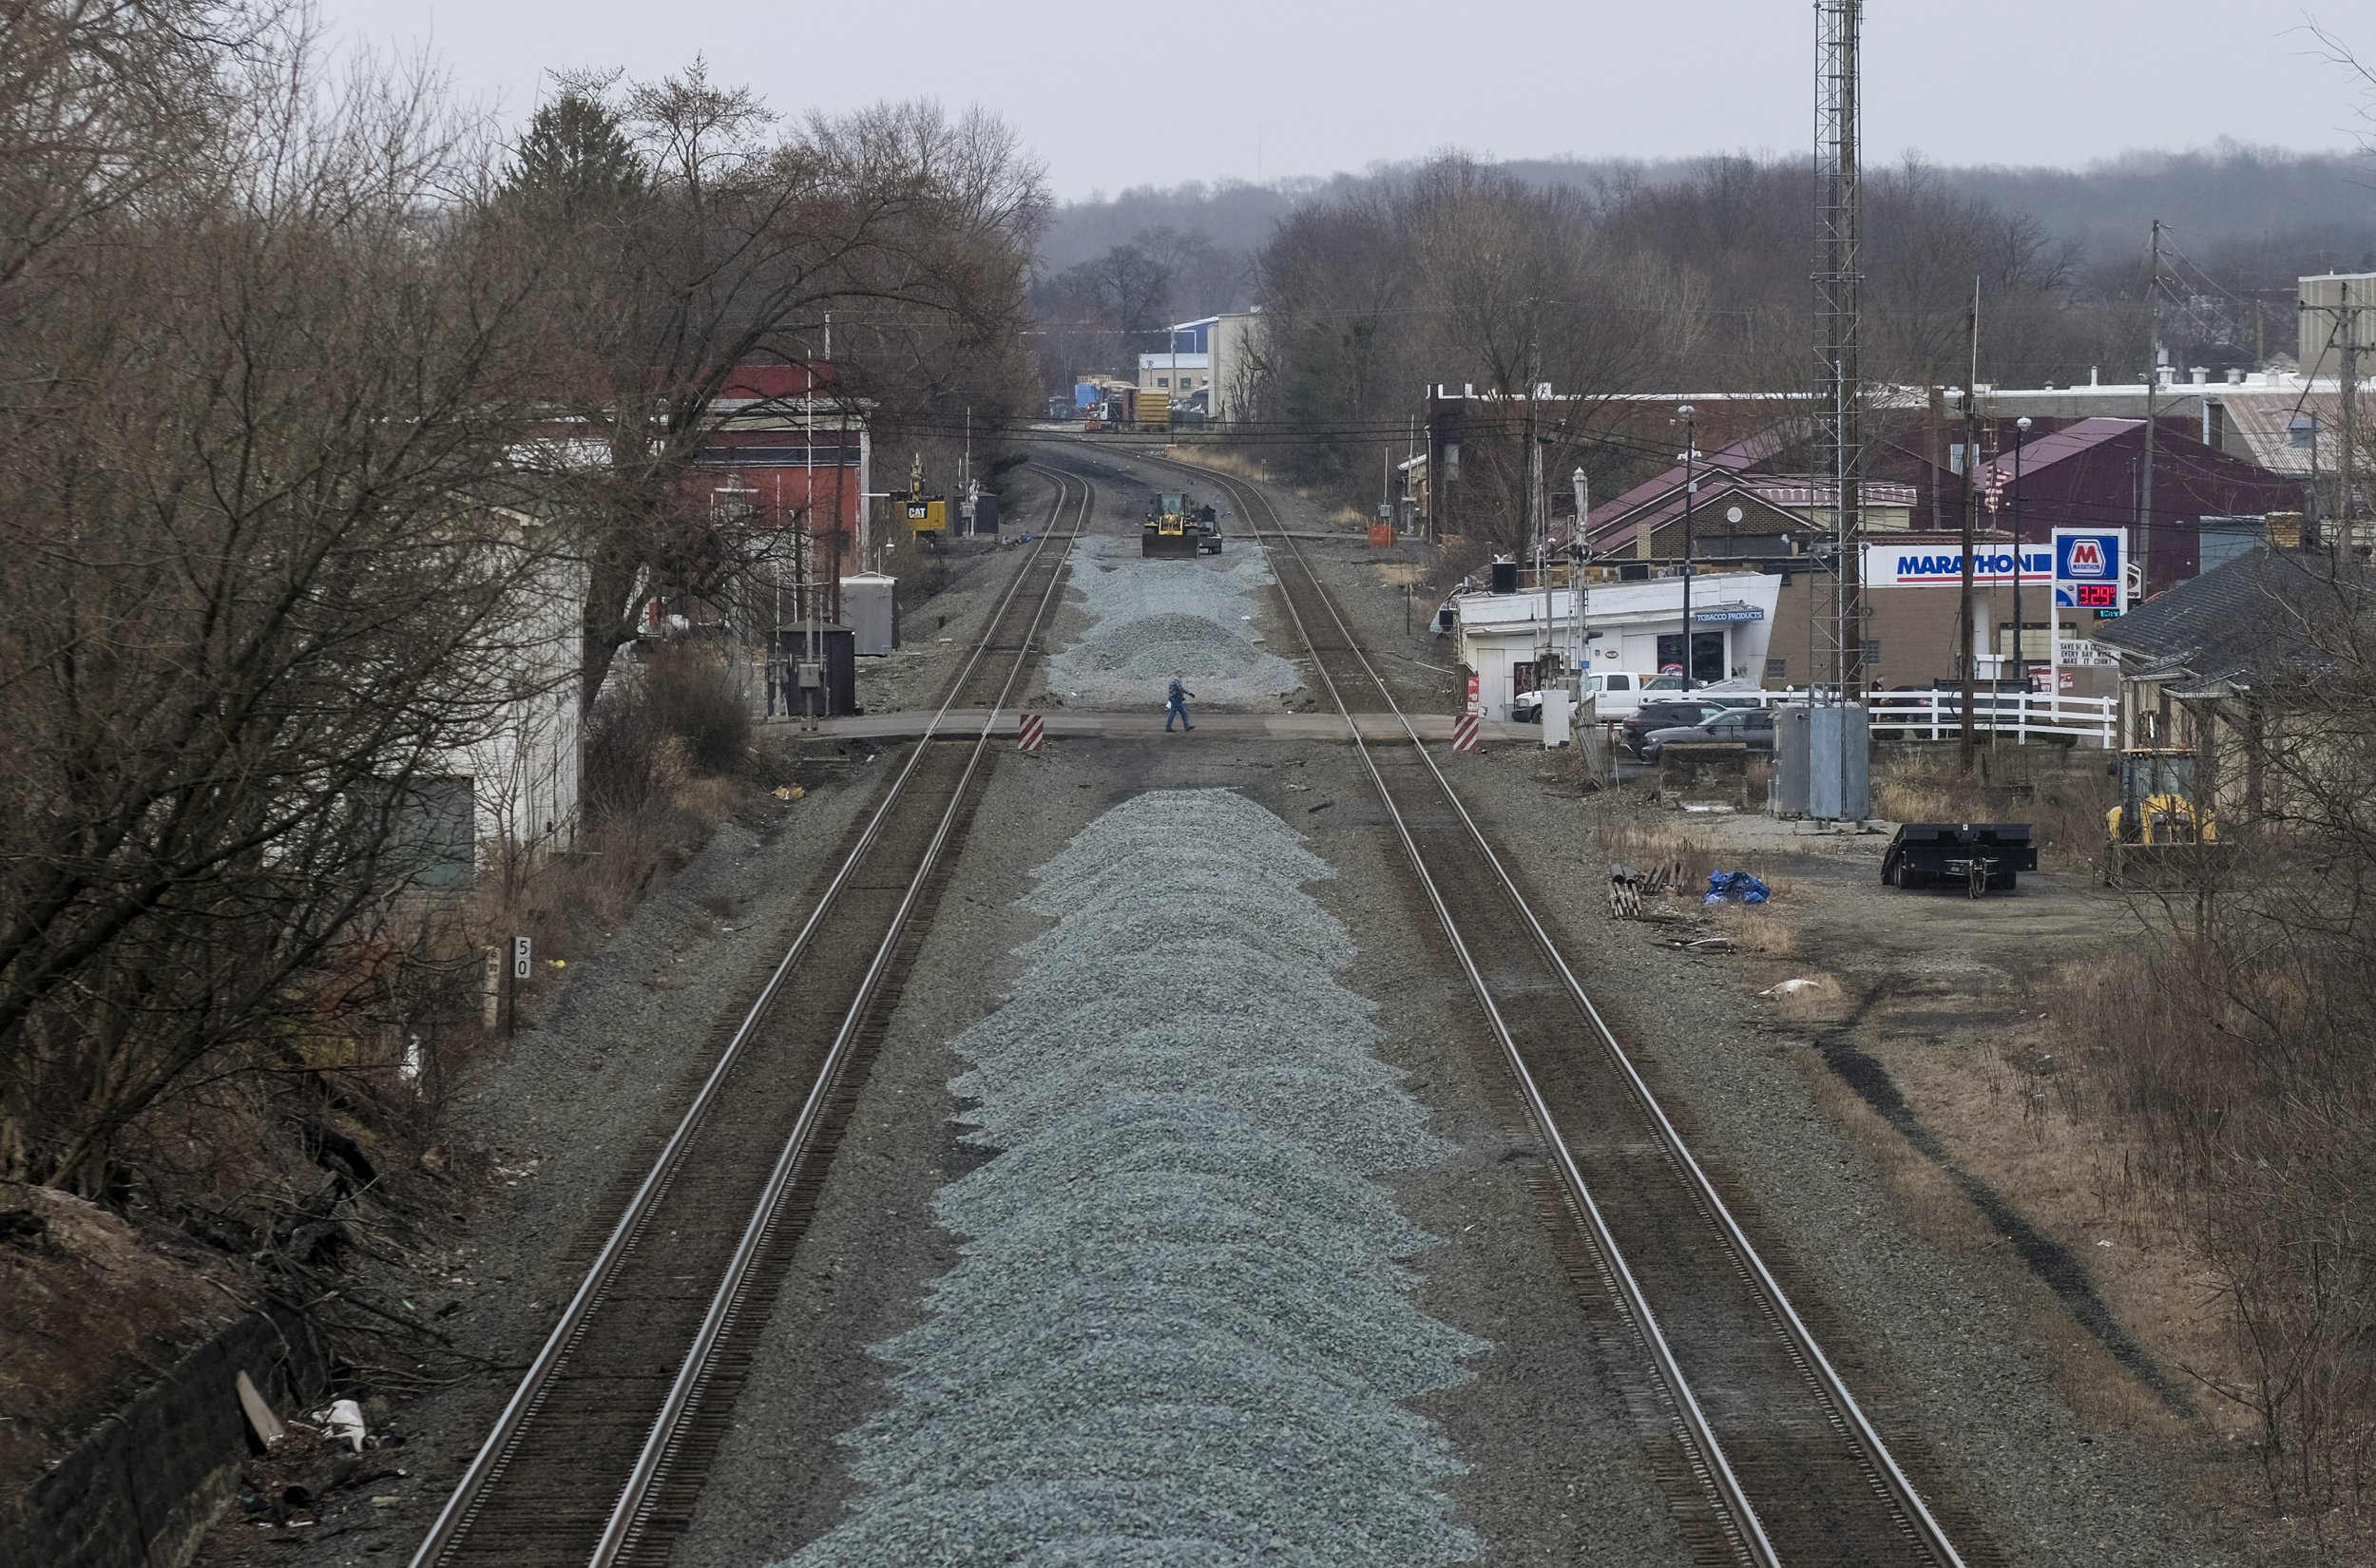  A man walks across the train tracks that run through East Palestine, Ohio on Friday, February 17, 2023. On February 3 a Norfolk Southern train derailed while carrying several cars containing toxic materials including Vinyl Phosphate. Following the d